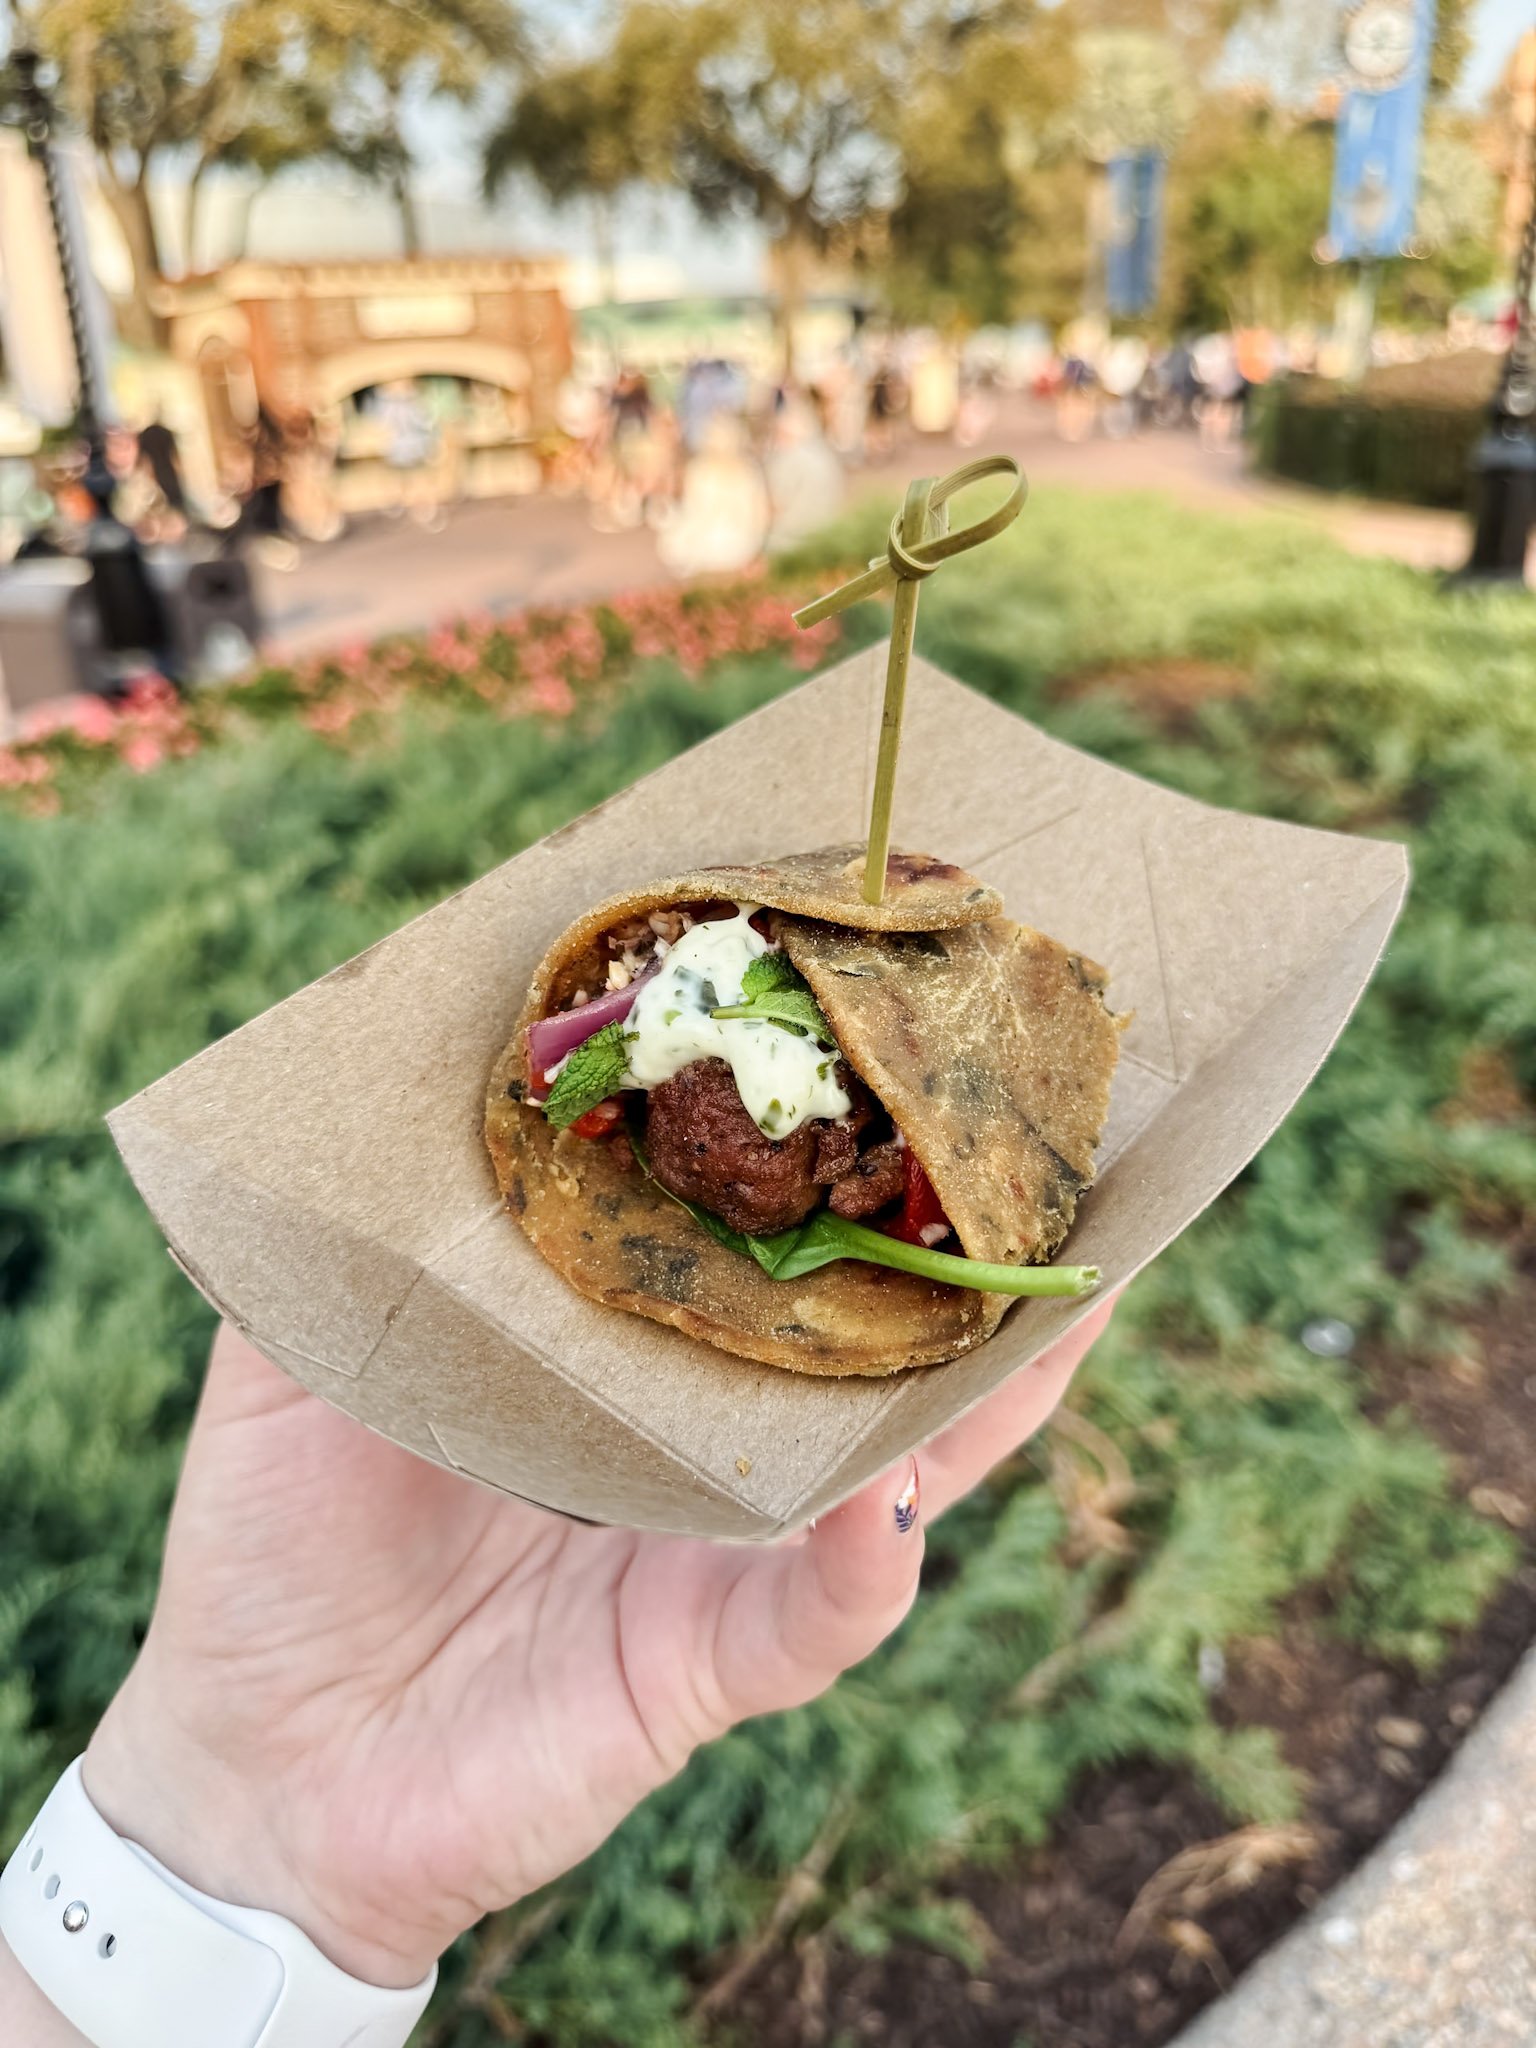 Impossible Farmhouse Meatball with Lentil Bread, Spinach, Marinated Vegetables and Creamy Herb Aioli (plant-based, Garden Graze item)